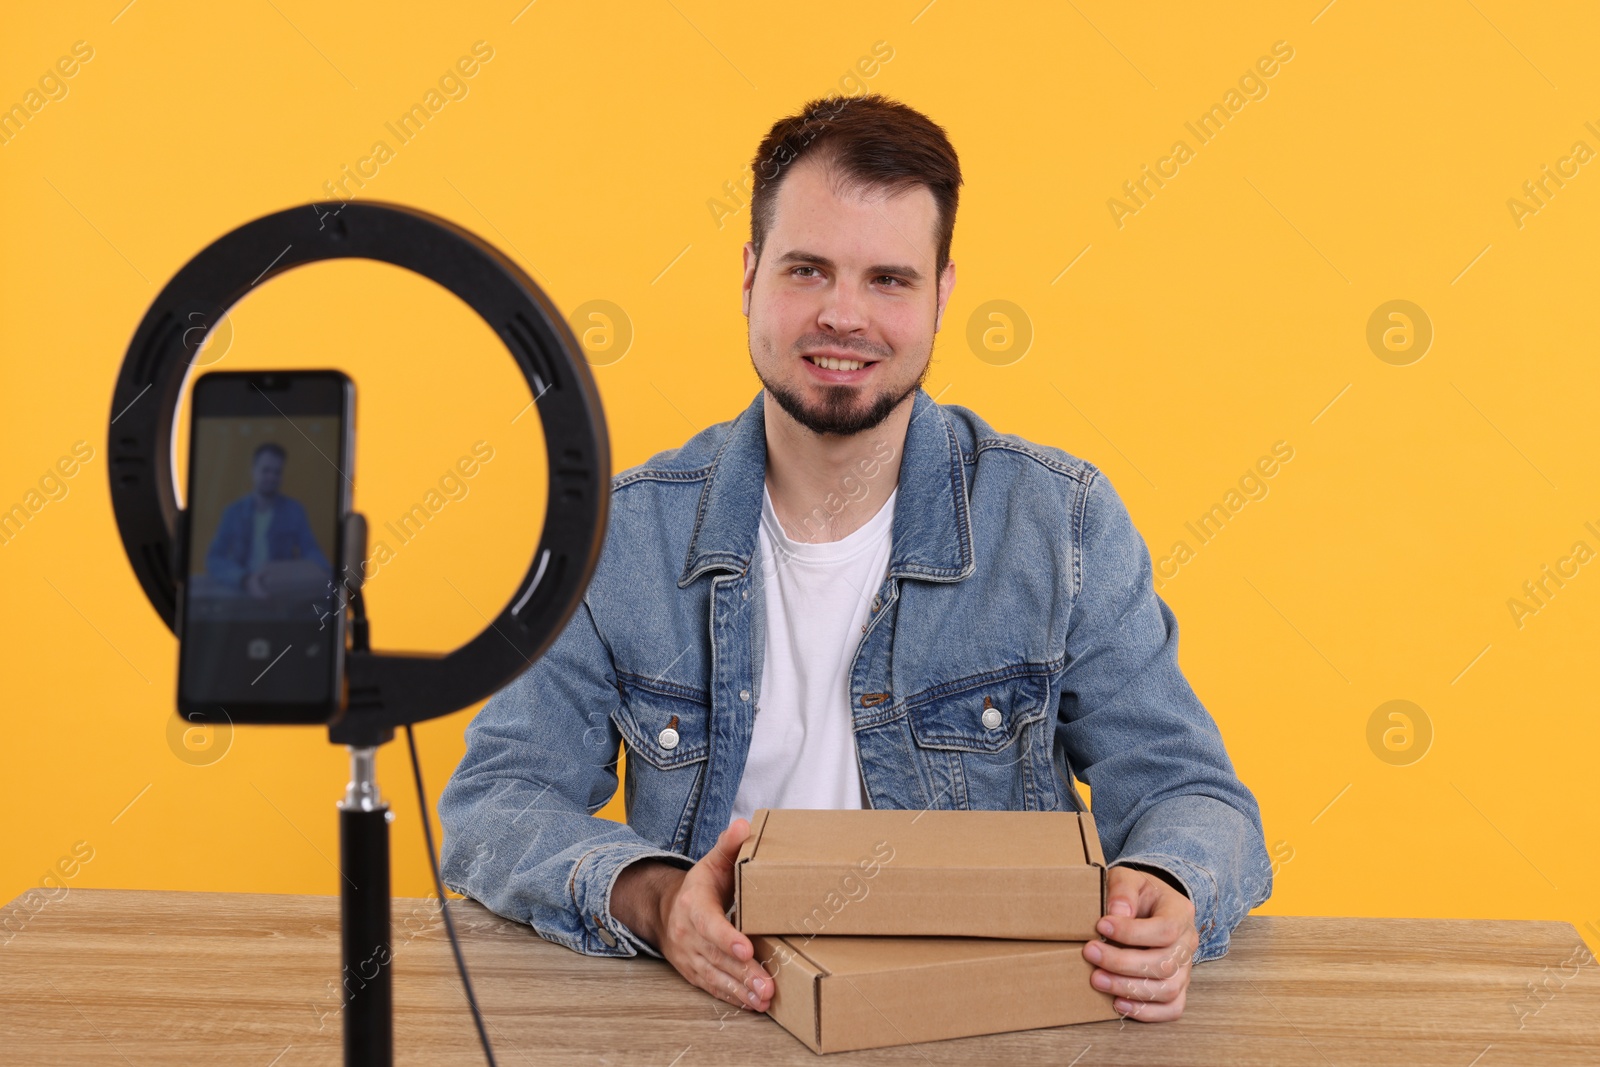 Photo of Smiling fashion blogger with parcels recording video at table against orange background